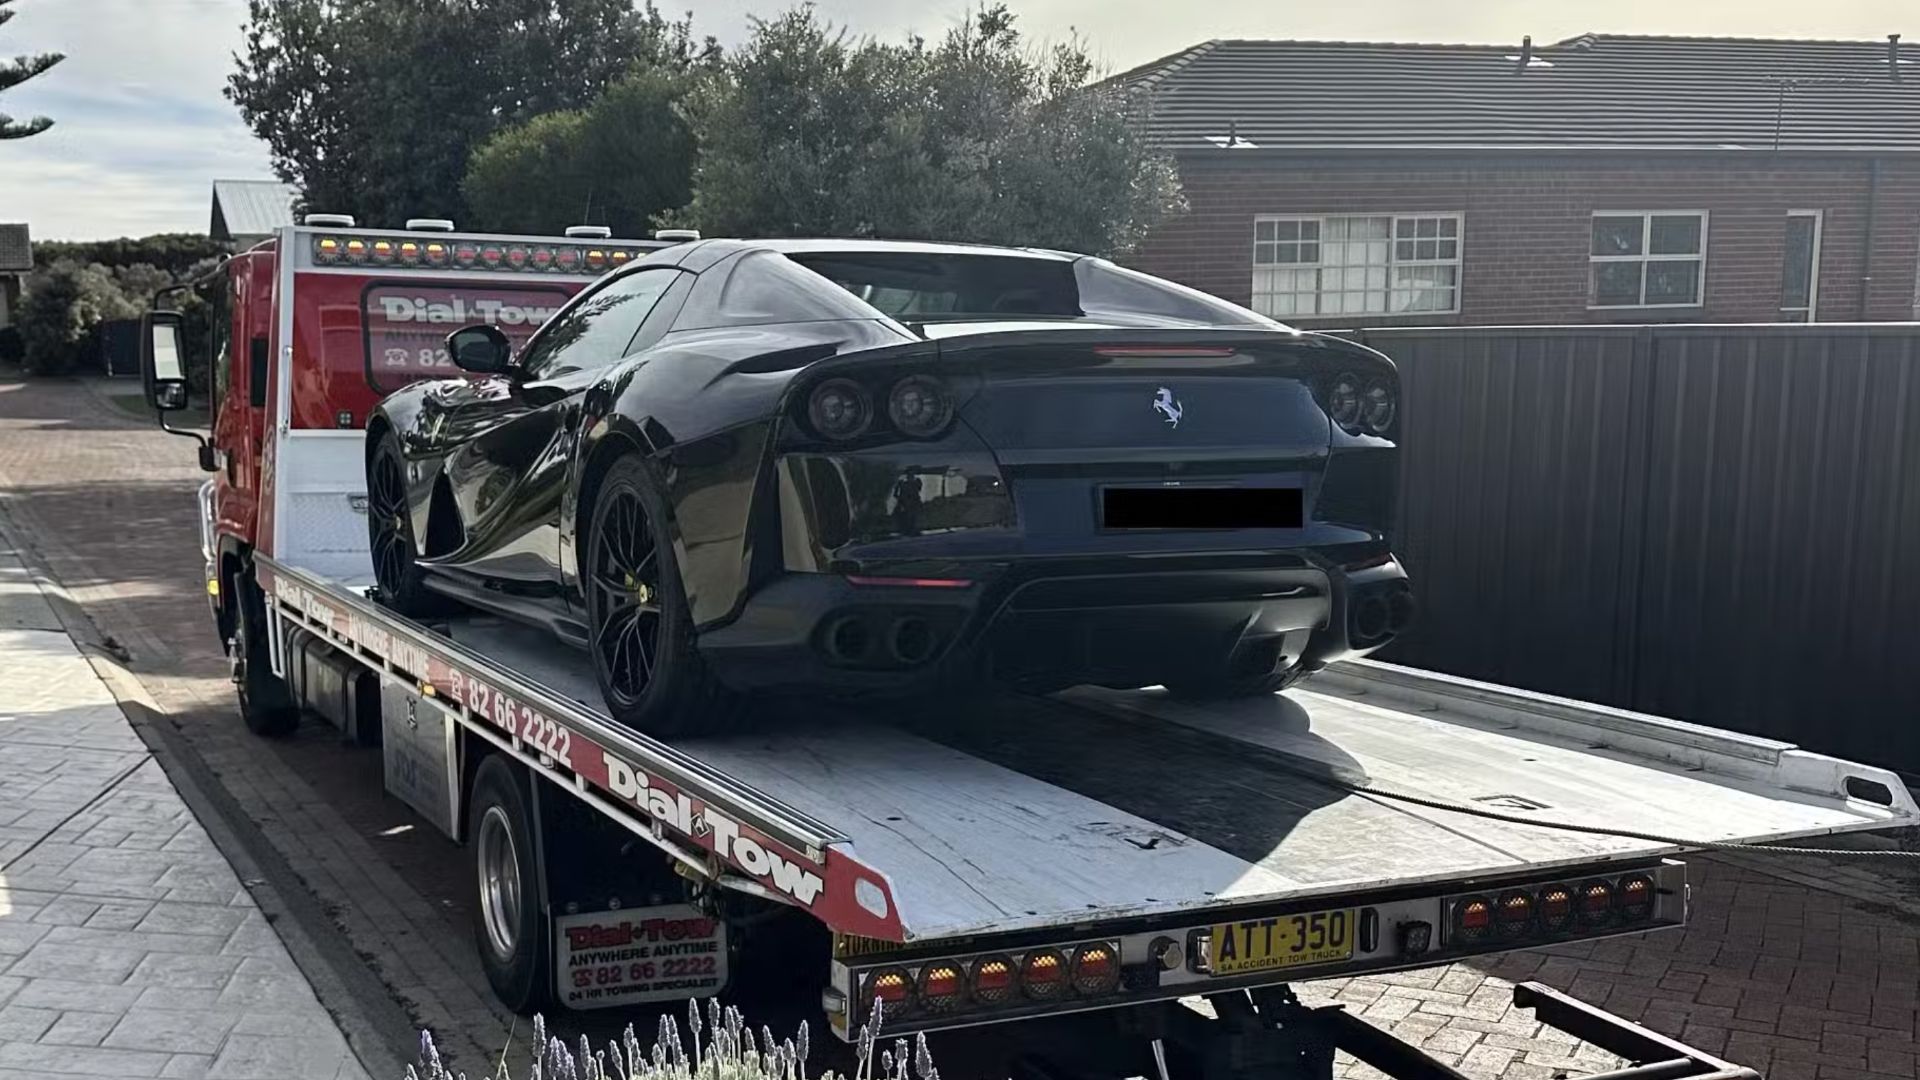 Ferrari Impounded After Driver Clocked at 76 km/h Over Speed Limit